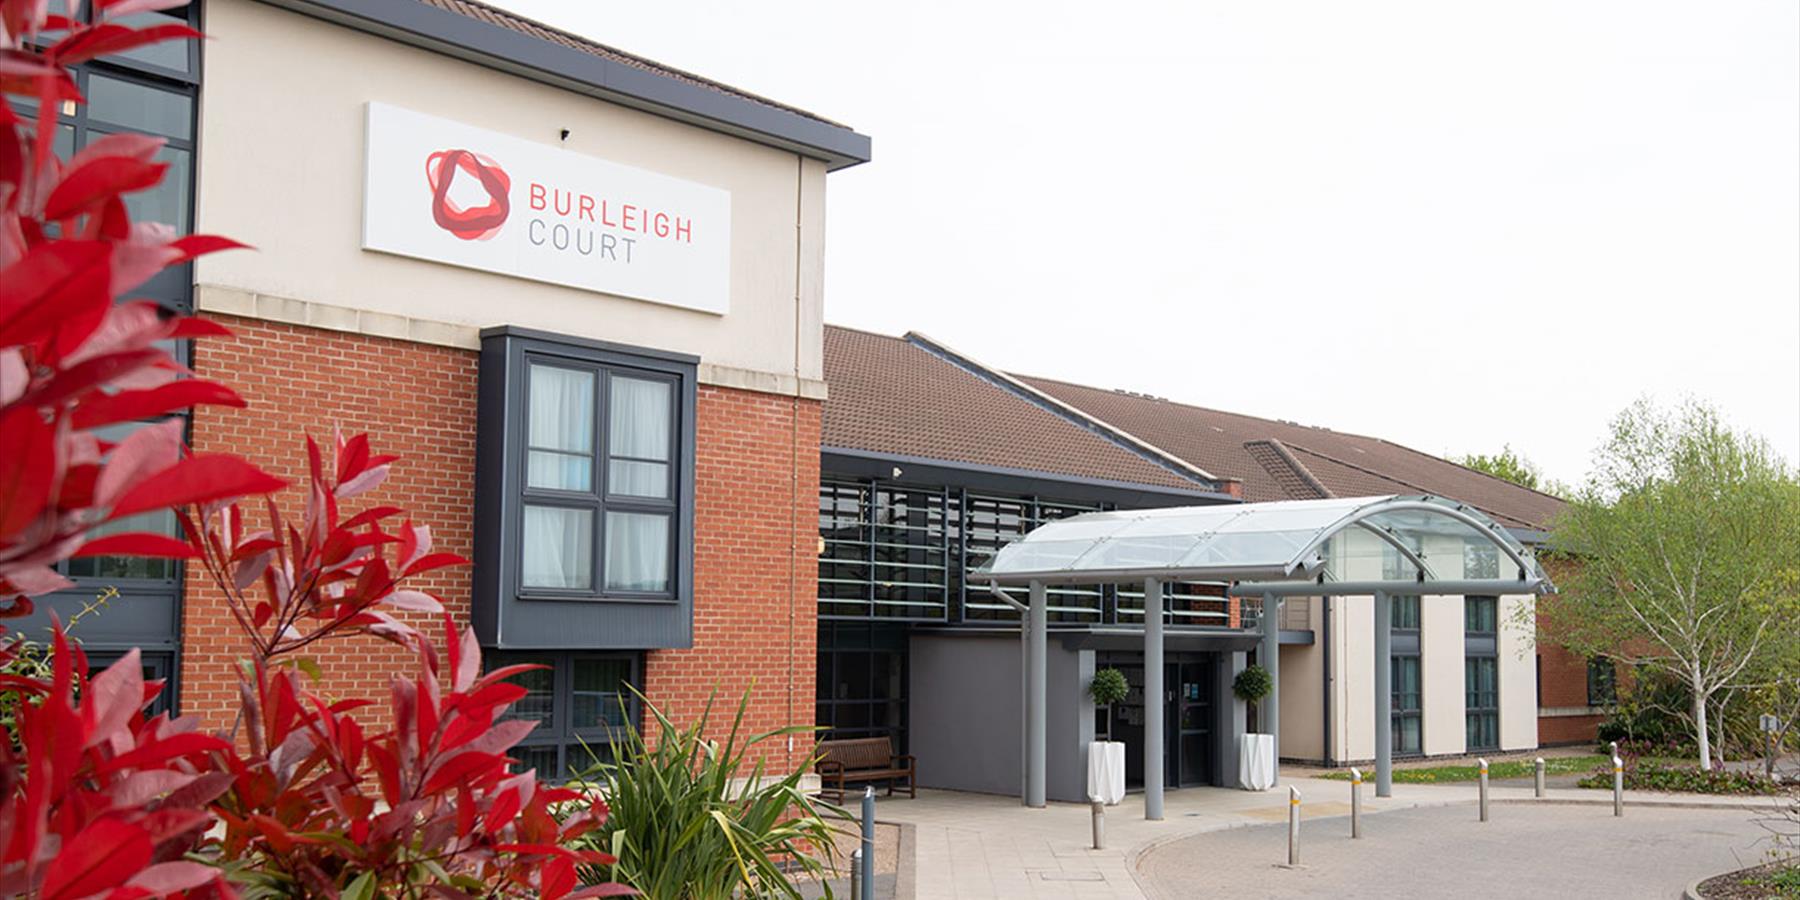 Burleigh Court Conferences Weddings Conferences Category in